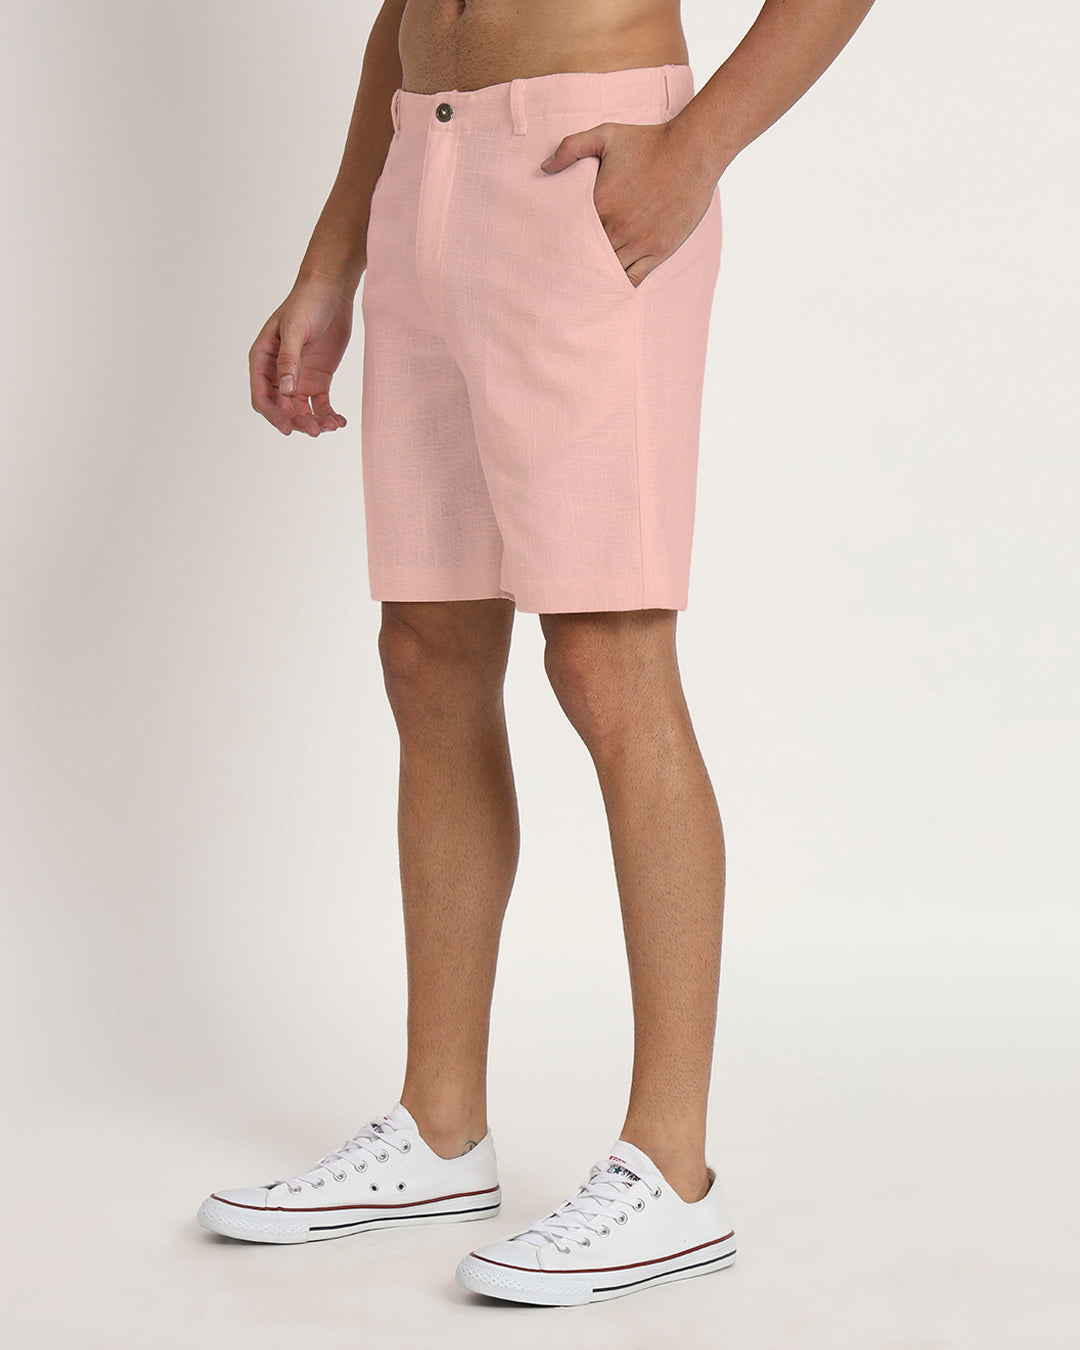 Combo : Ready For Anything Midnight Blue & Fondant Pink Men's Shorts